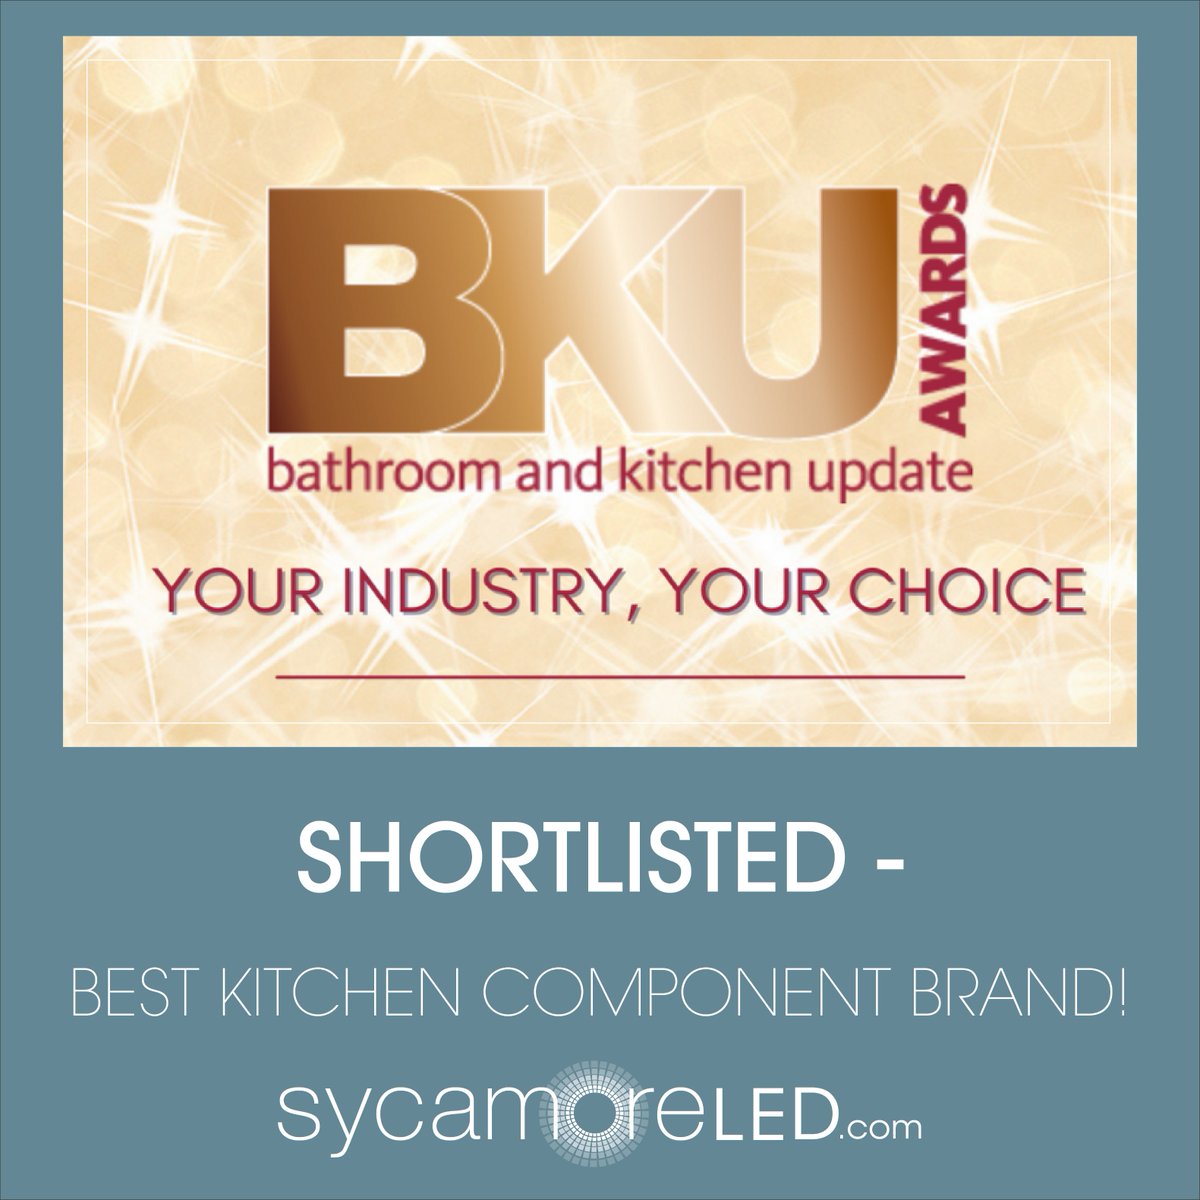 We are delighted to announce that we made the BKU Awards shortlist in the Best Kitchen Component Brand category! Thank you to everyone who voted for us! #kbb #awards #kitchenlighting